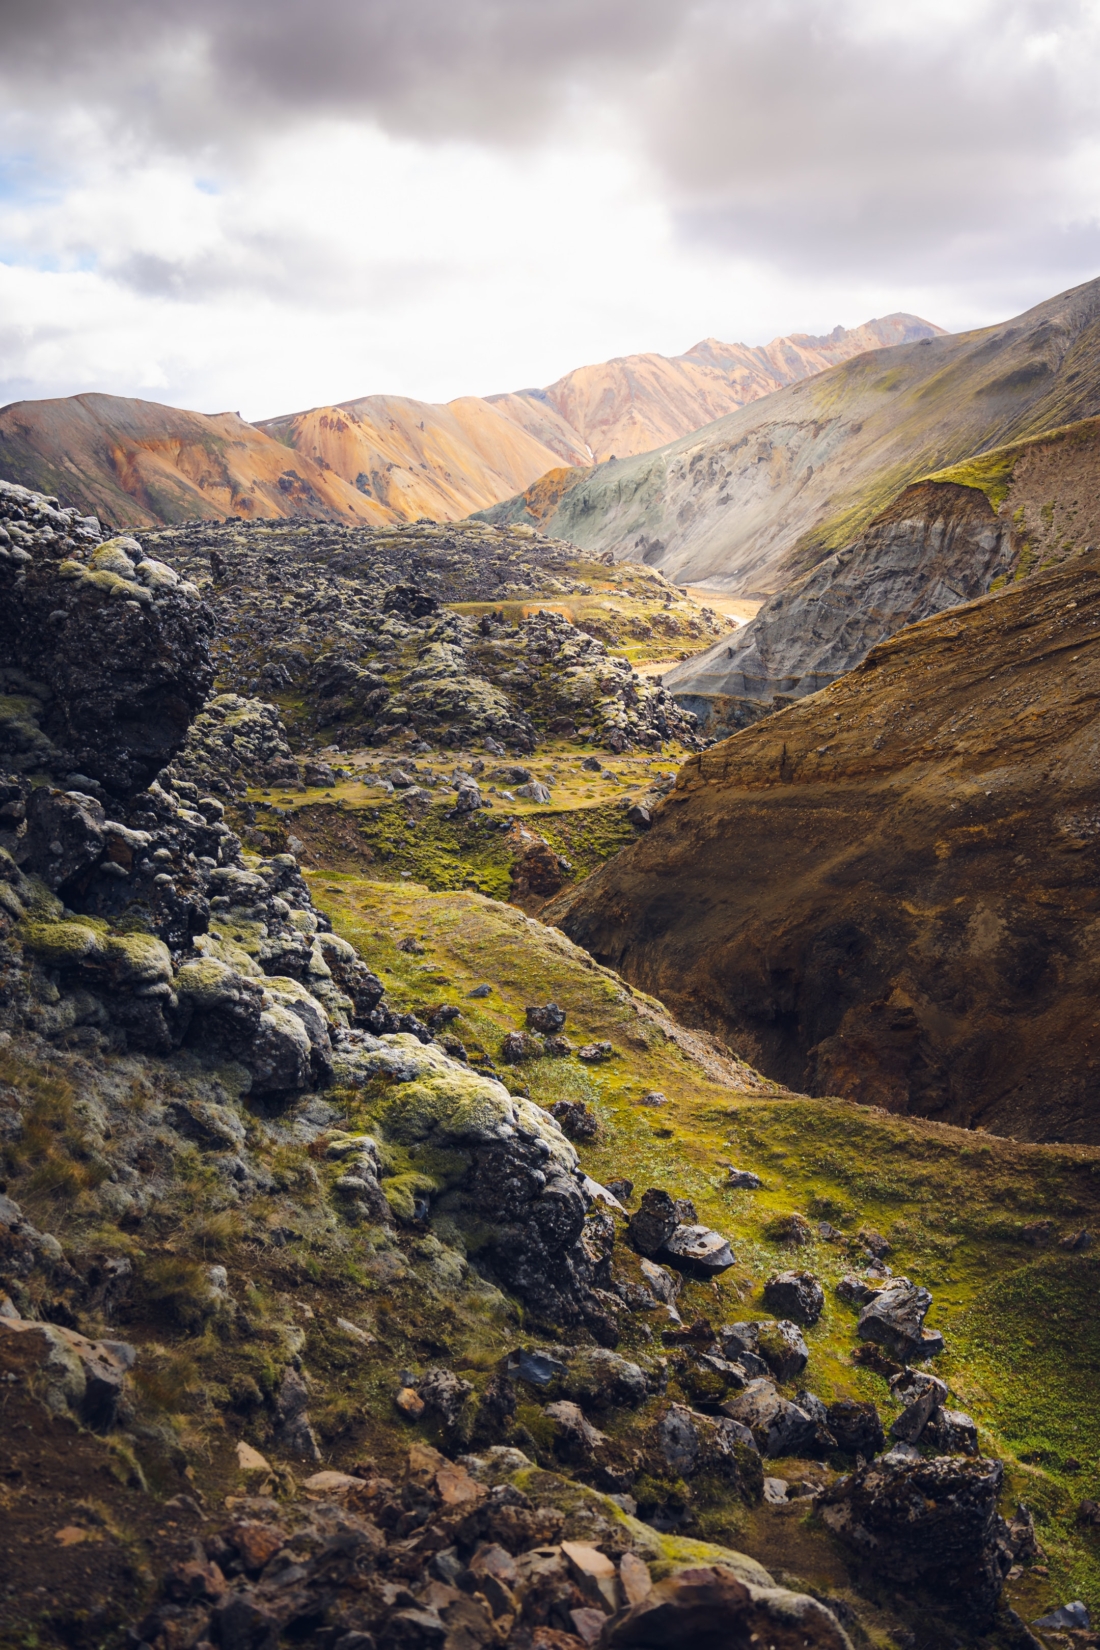 Hiking along the Laugavegur Trail will showcase the magnificence of Iceland’s geography